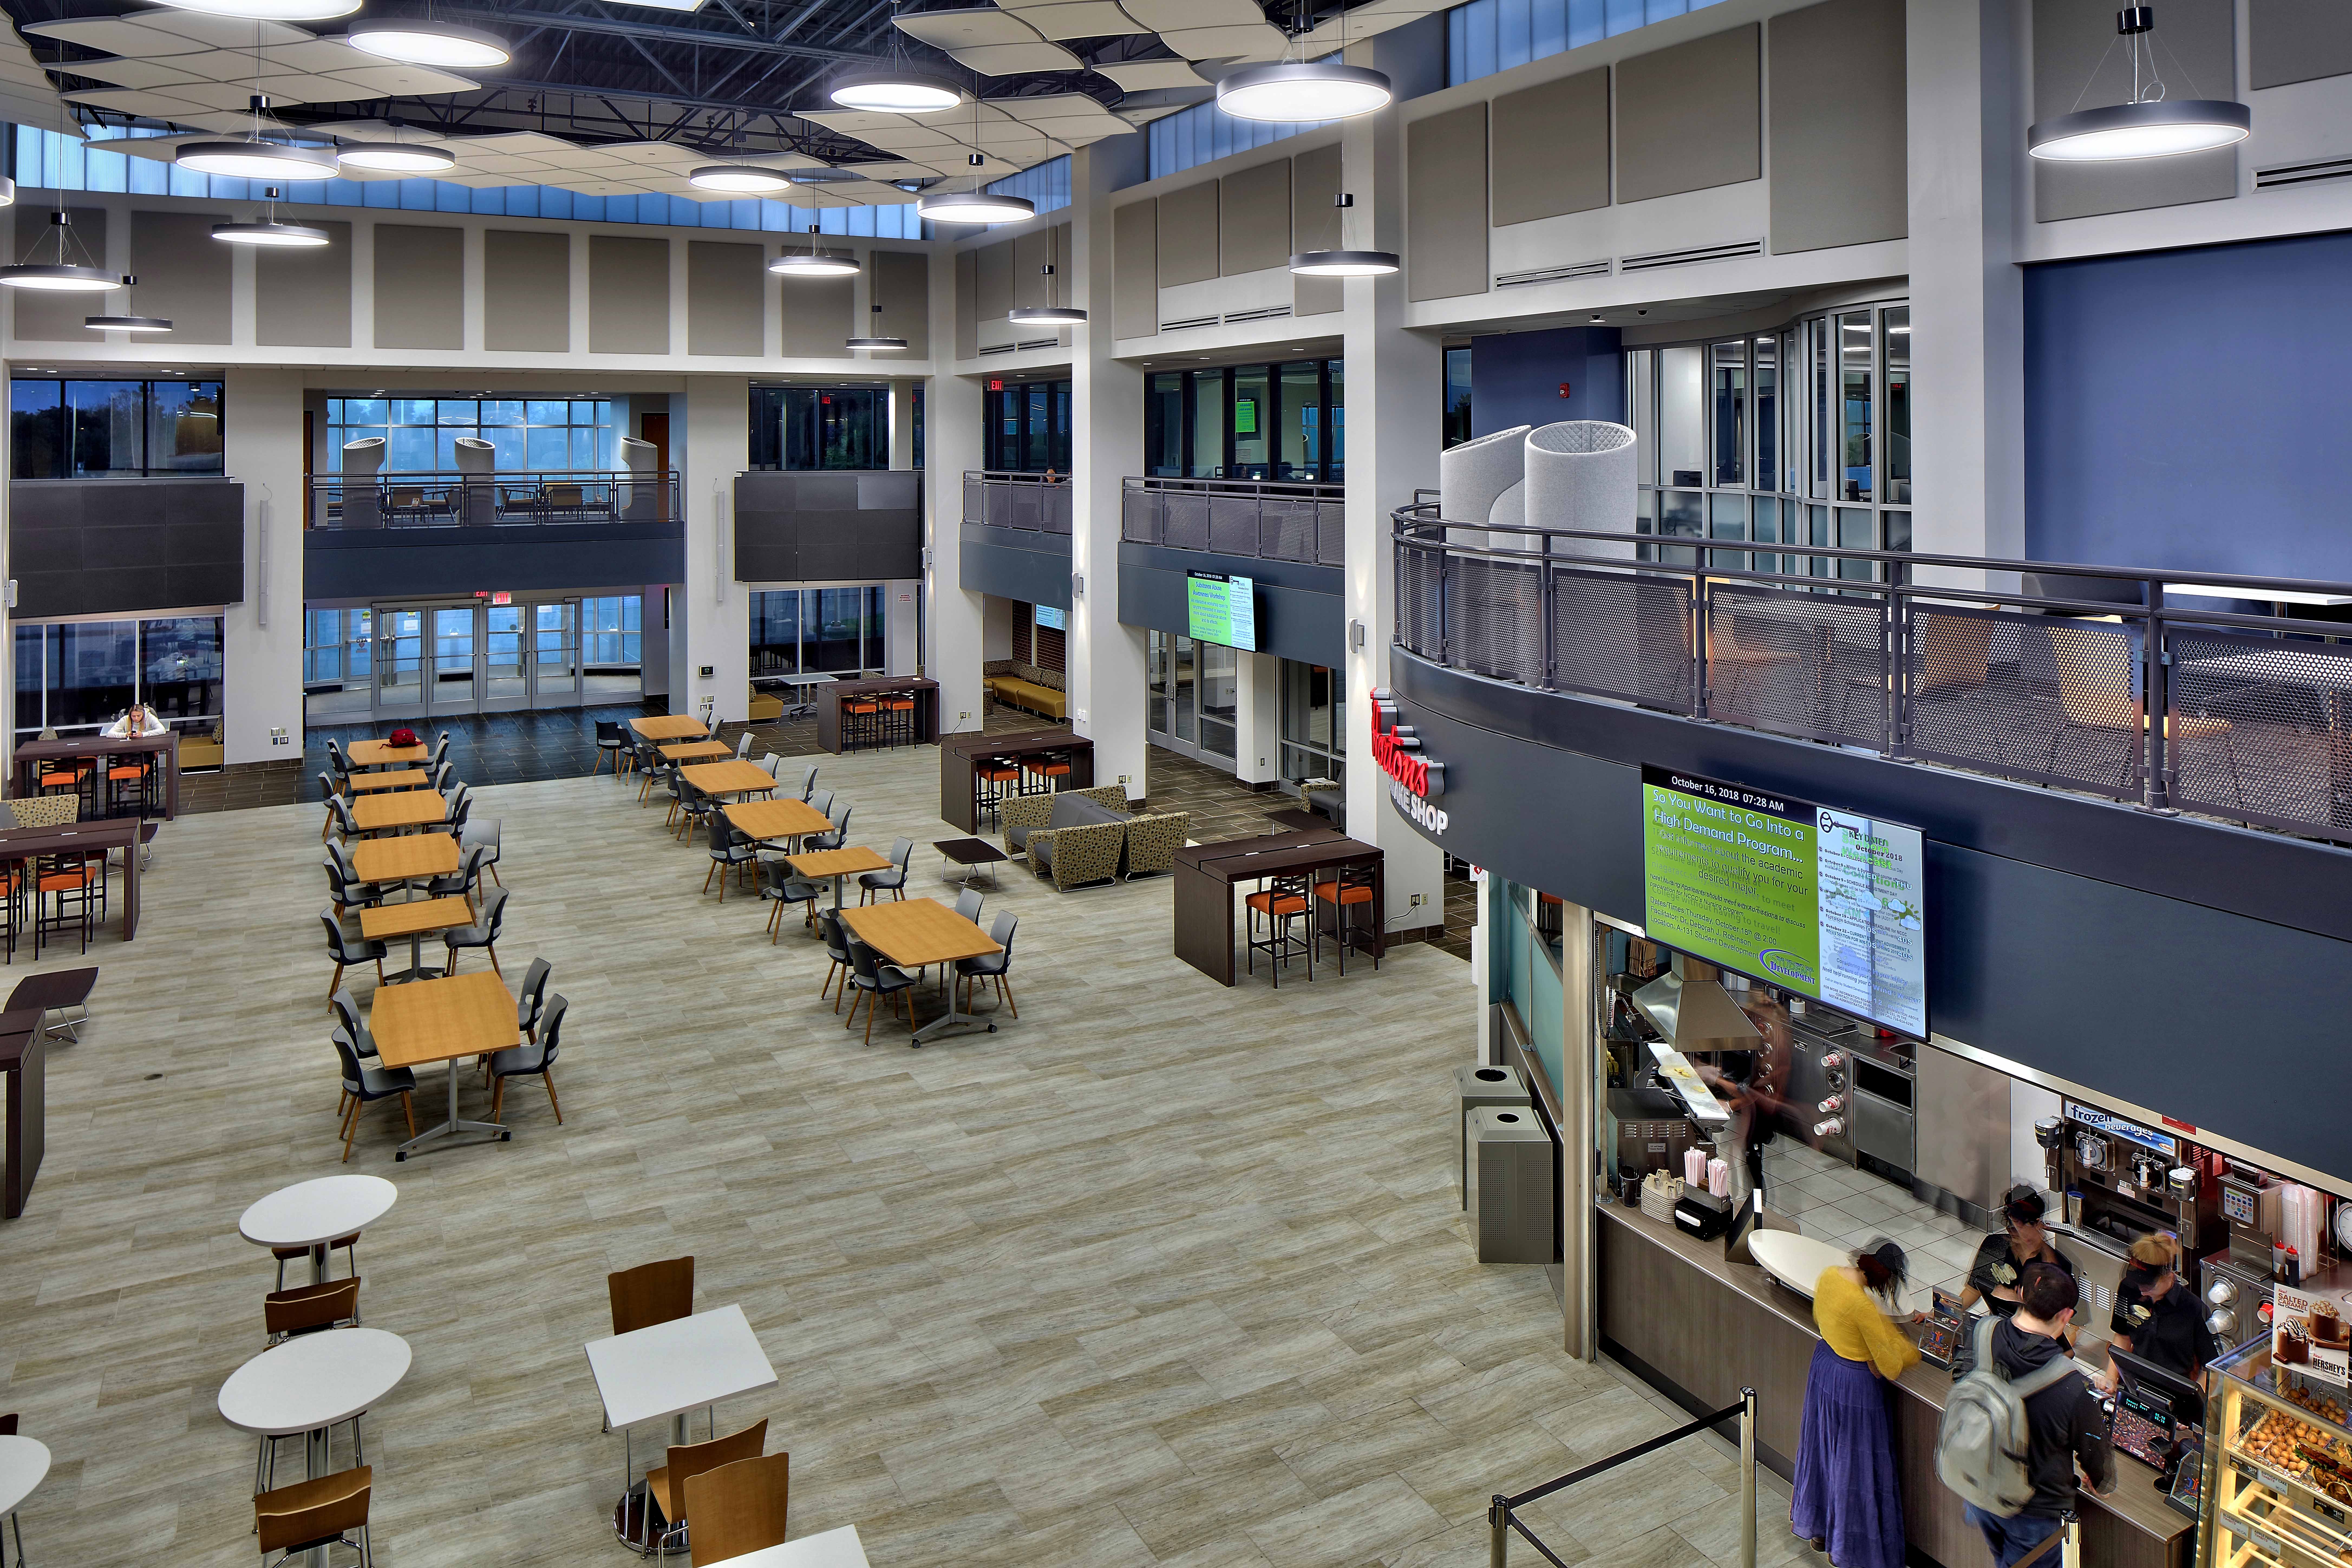 Interior of the Learning Commons atrium.